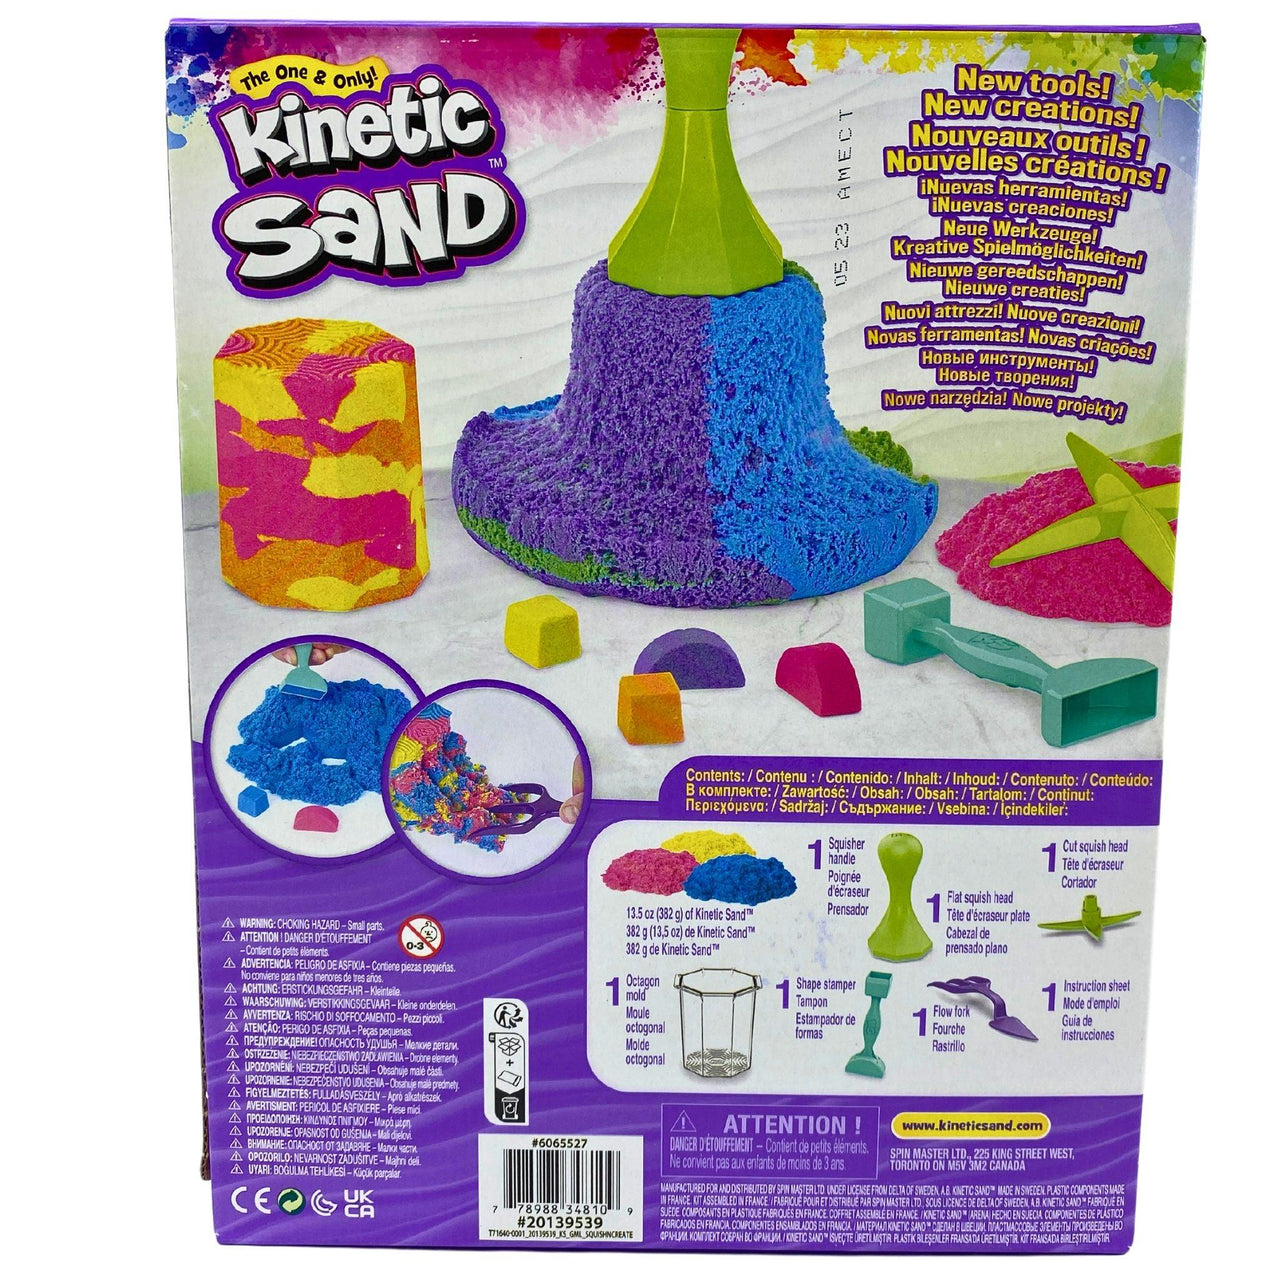 The One & Only Kinetic Sand Squish Squish to Flow! Squish N' Create Ages 3+1 set (40 Pcs Lot) - Discount Wholesalers Inc